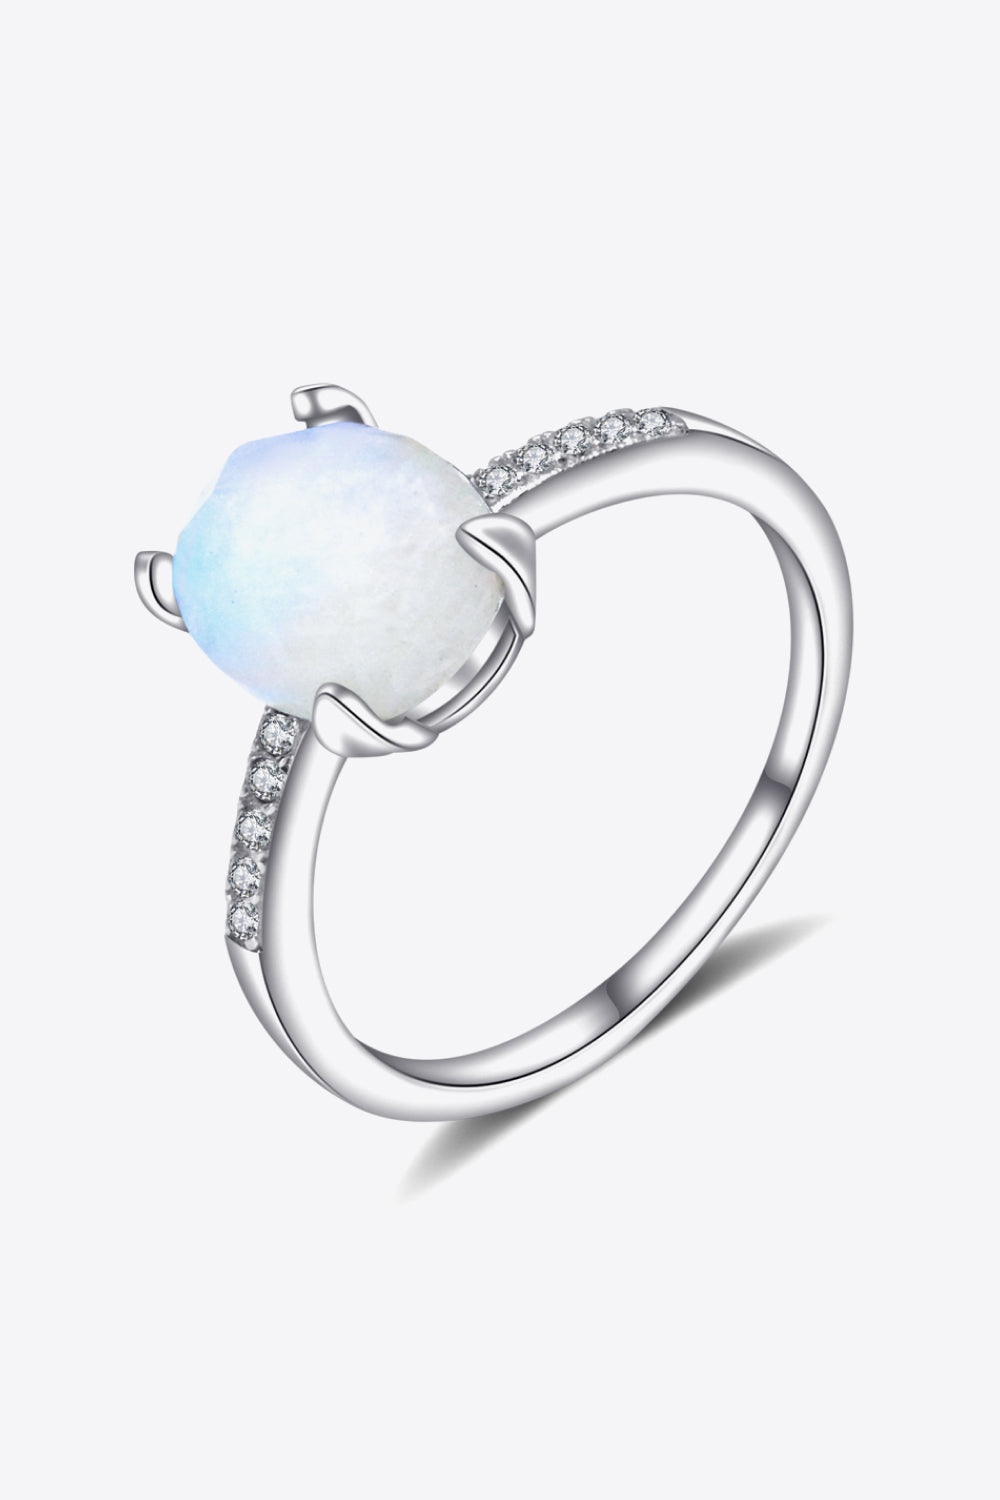 Get A Move On Moonstone Ring-Rings-Inspired by Justeen-Women's Clothing Boutique in Chicago, Illinois